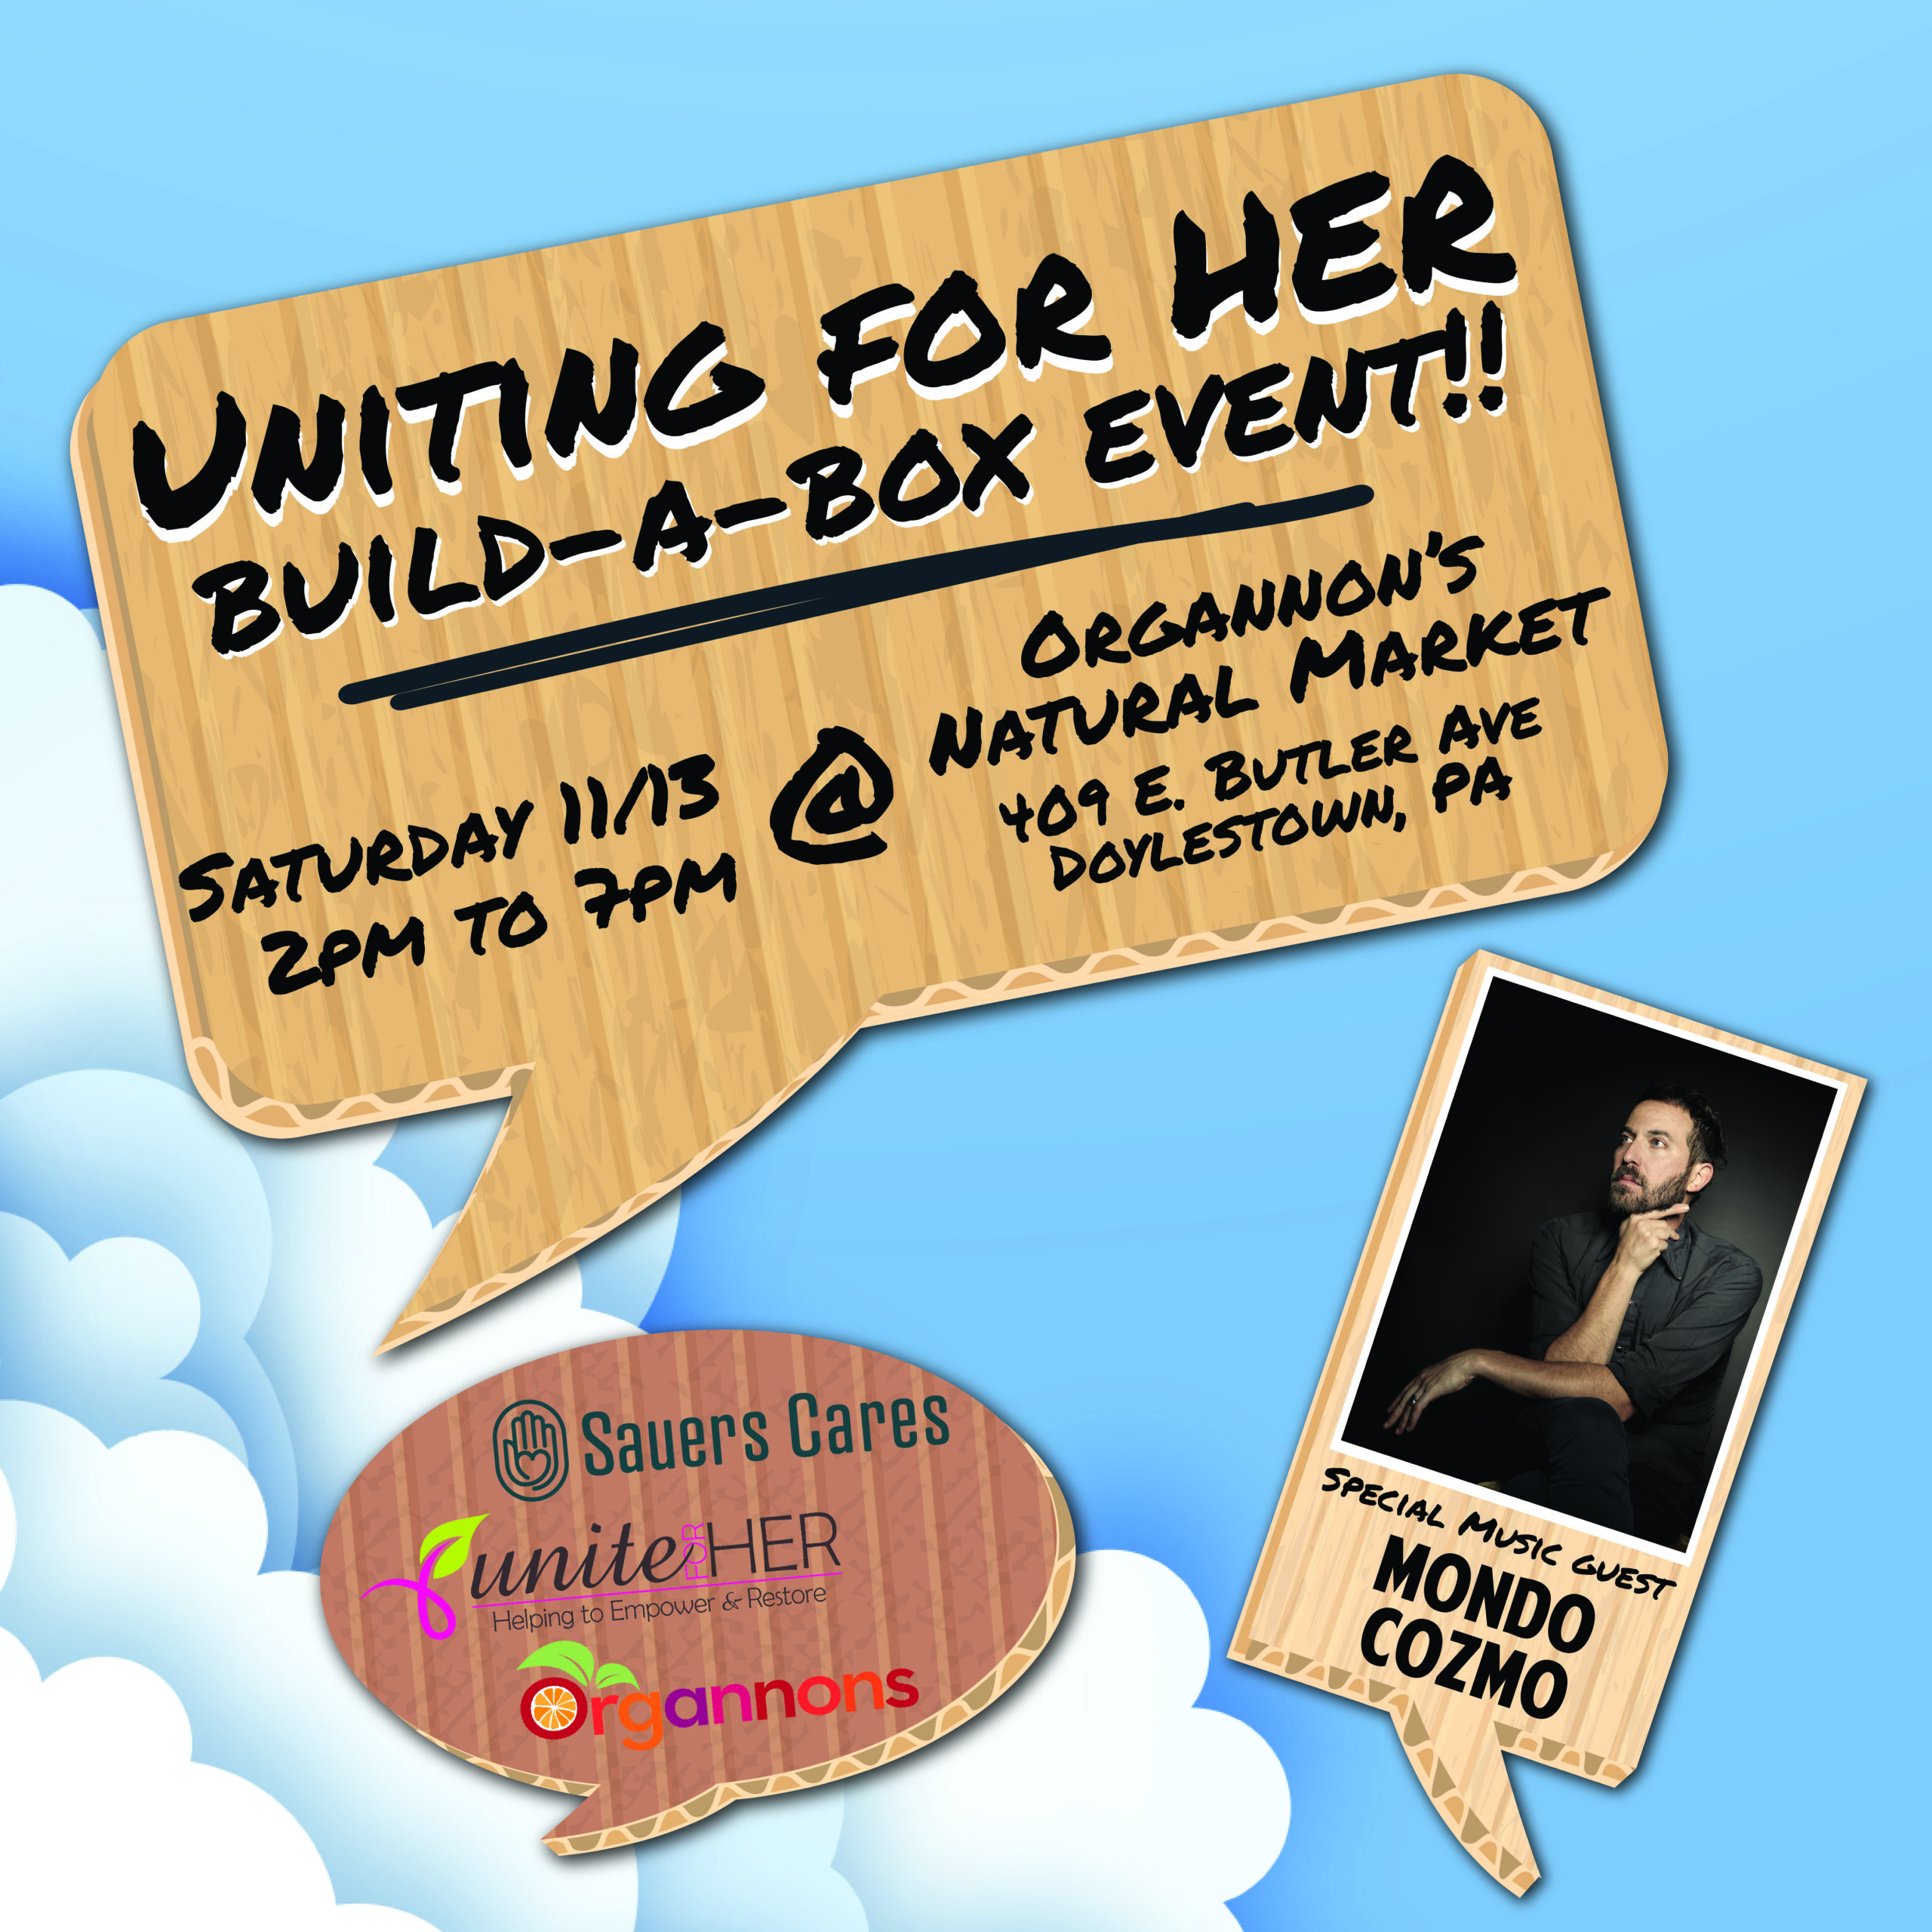 Uniting For Her Build-A-Box Event